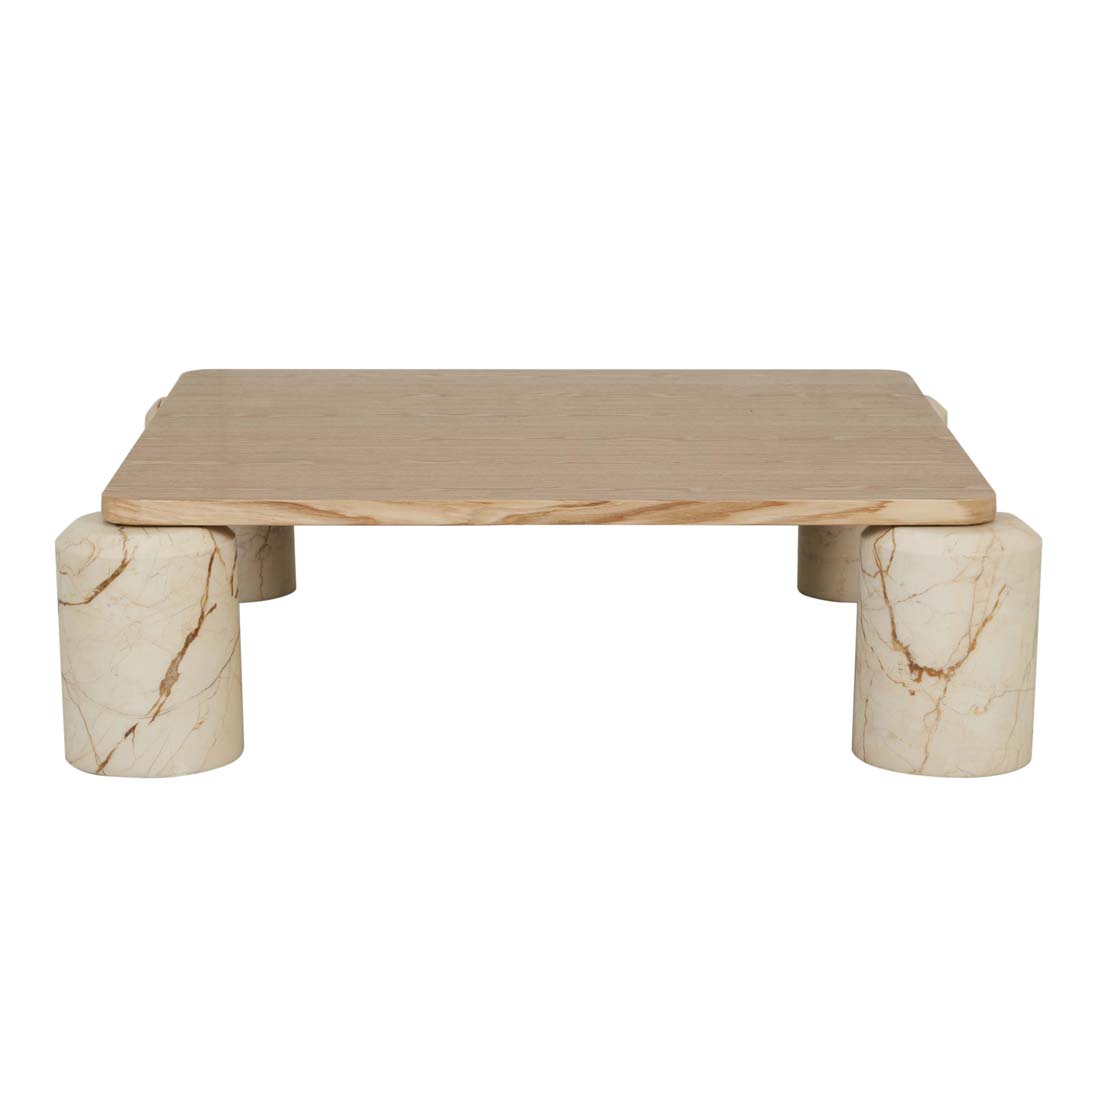 Pablo Marble Coffee Table image 15